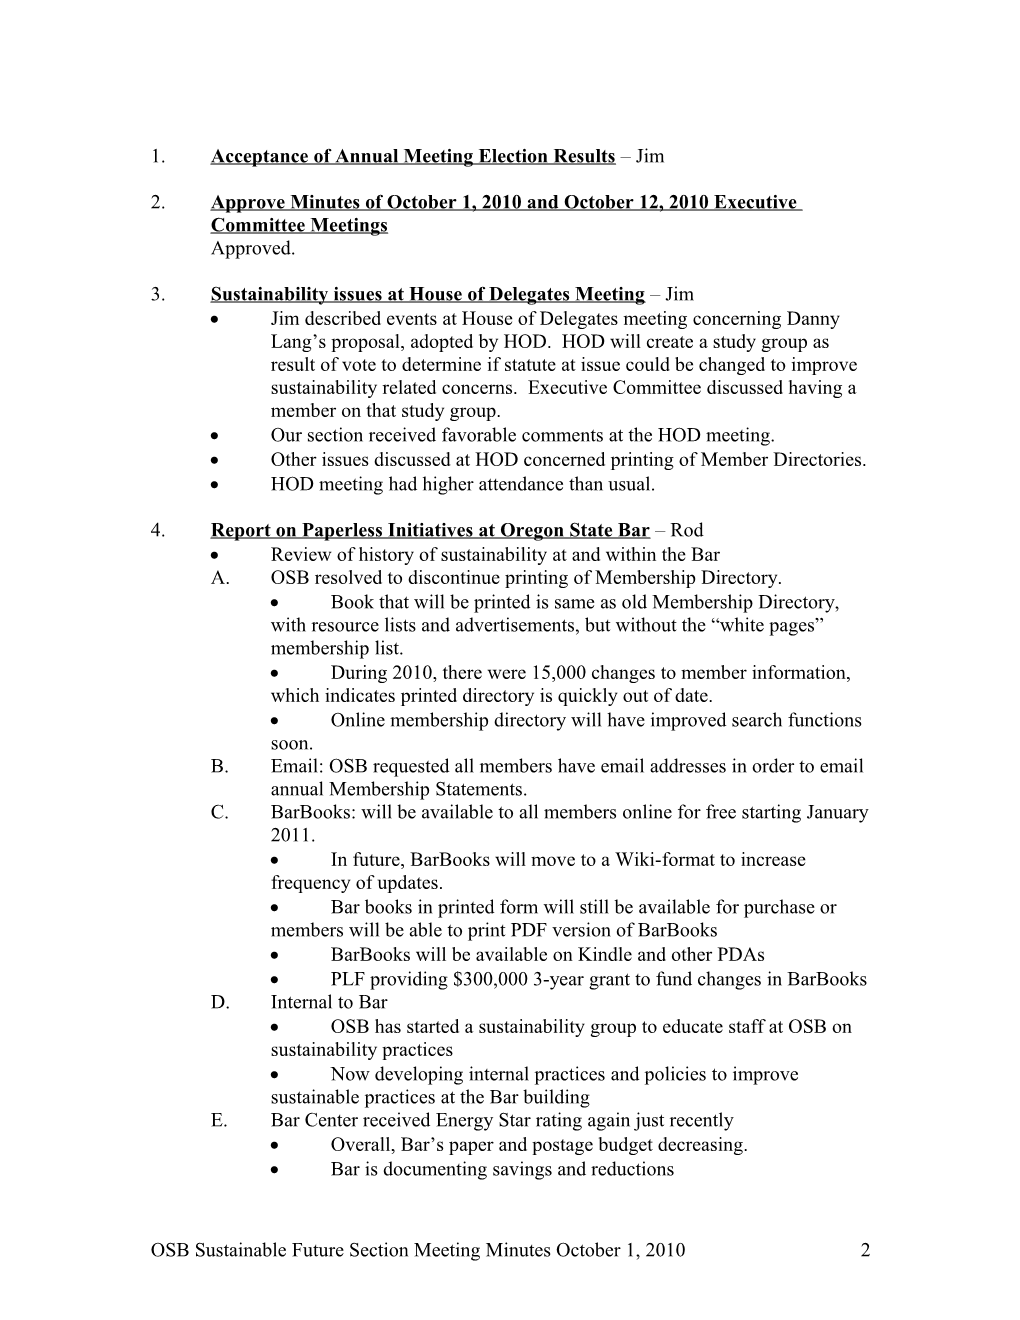 Minutes of Executive Committee Meeting of December 3, 2009